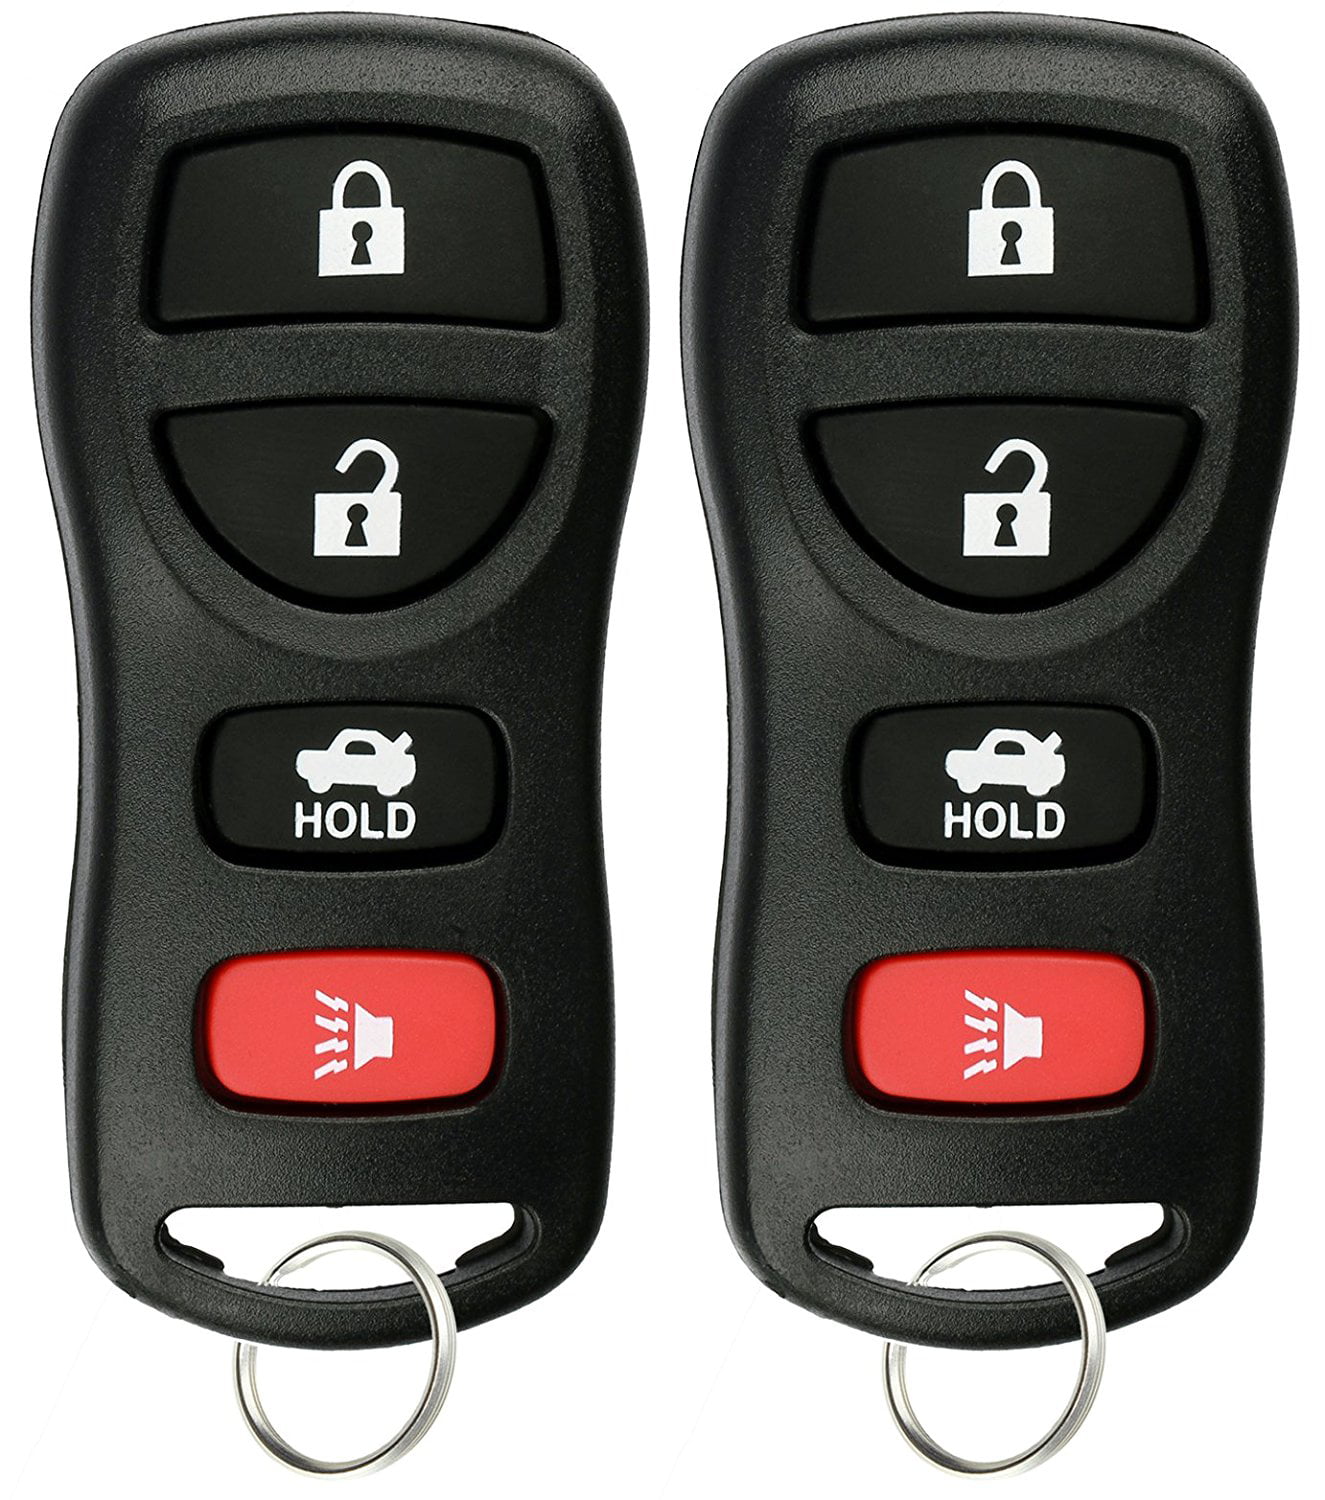 2 New Replacement Keyless Entry Remote Key Fob Clicker Control 22733524 KOBGT04A